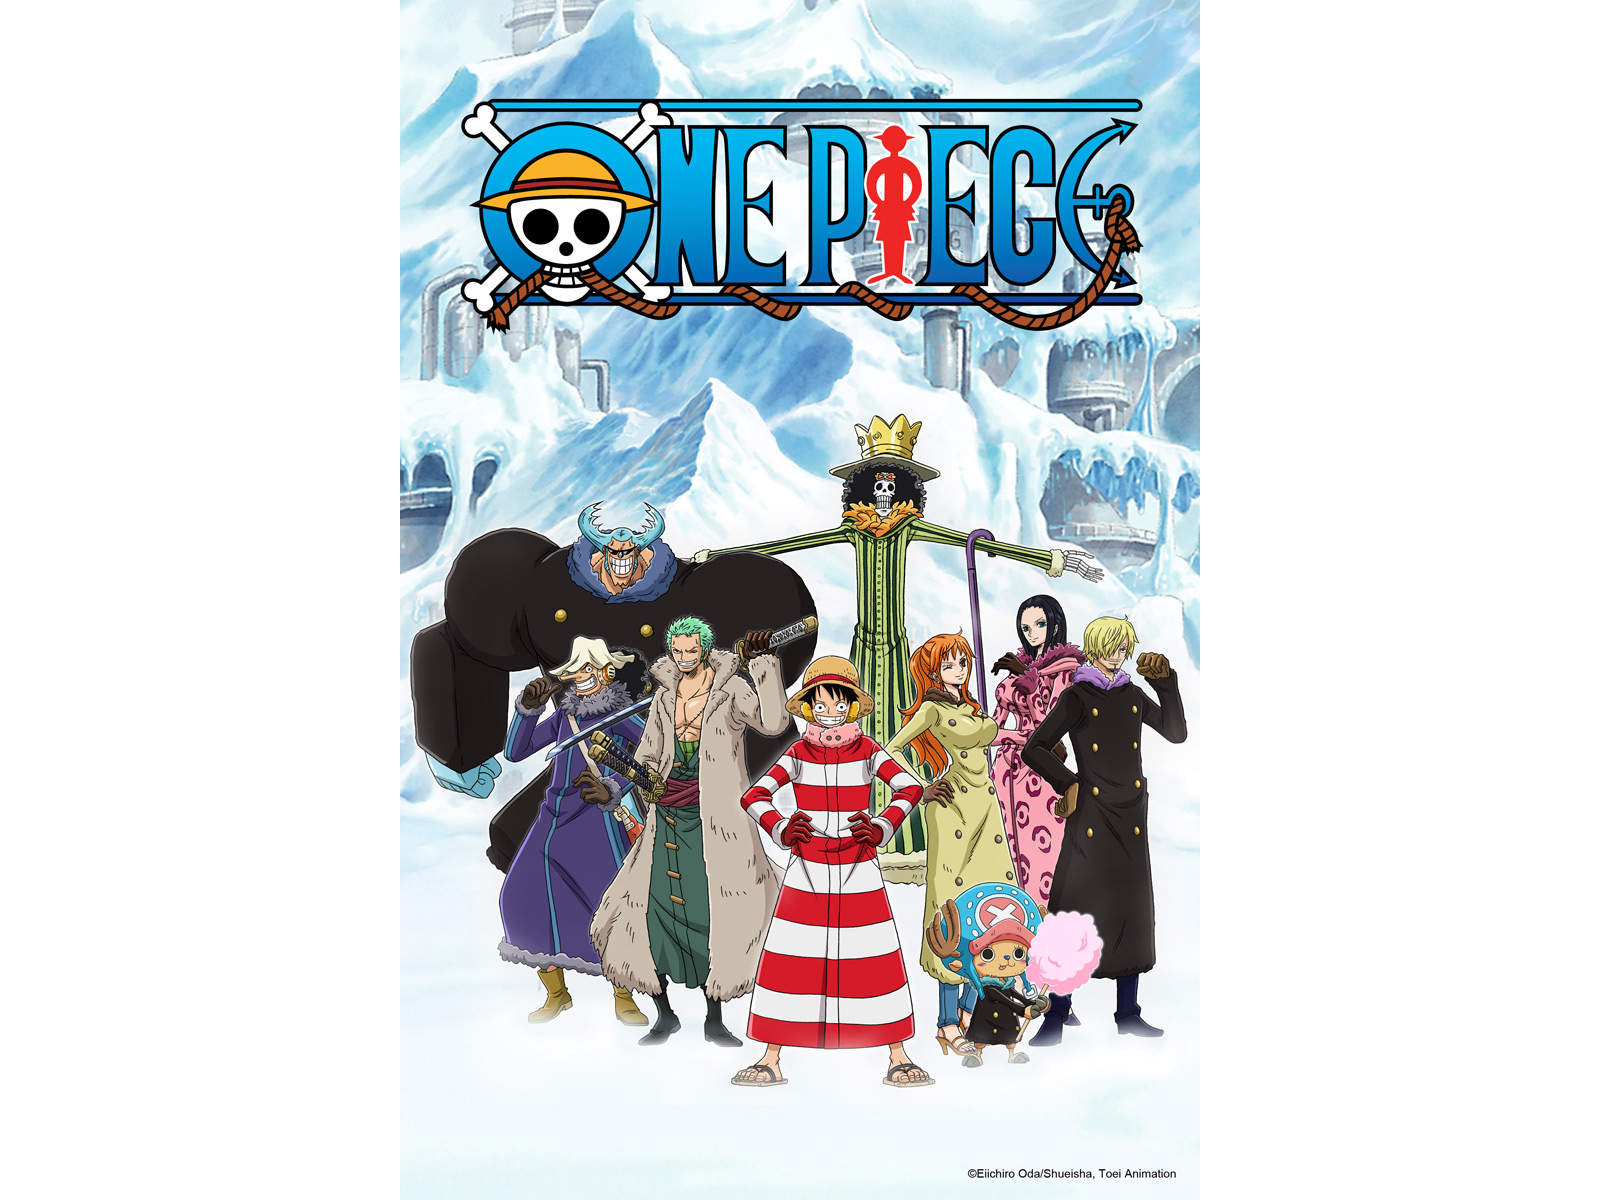 ENGLISH DUB IS BACK ON ONE PIECE WITH NEW LAUNCH ON DIGITAL